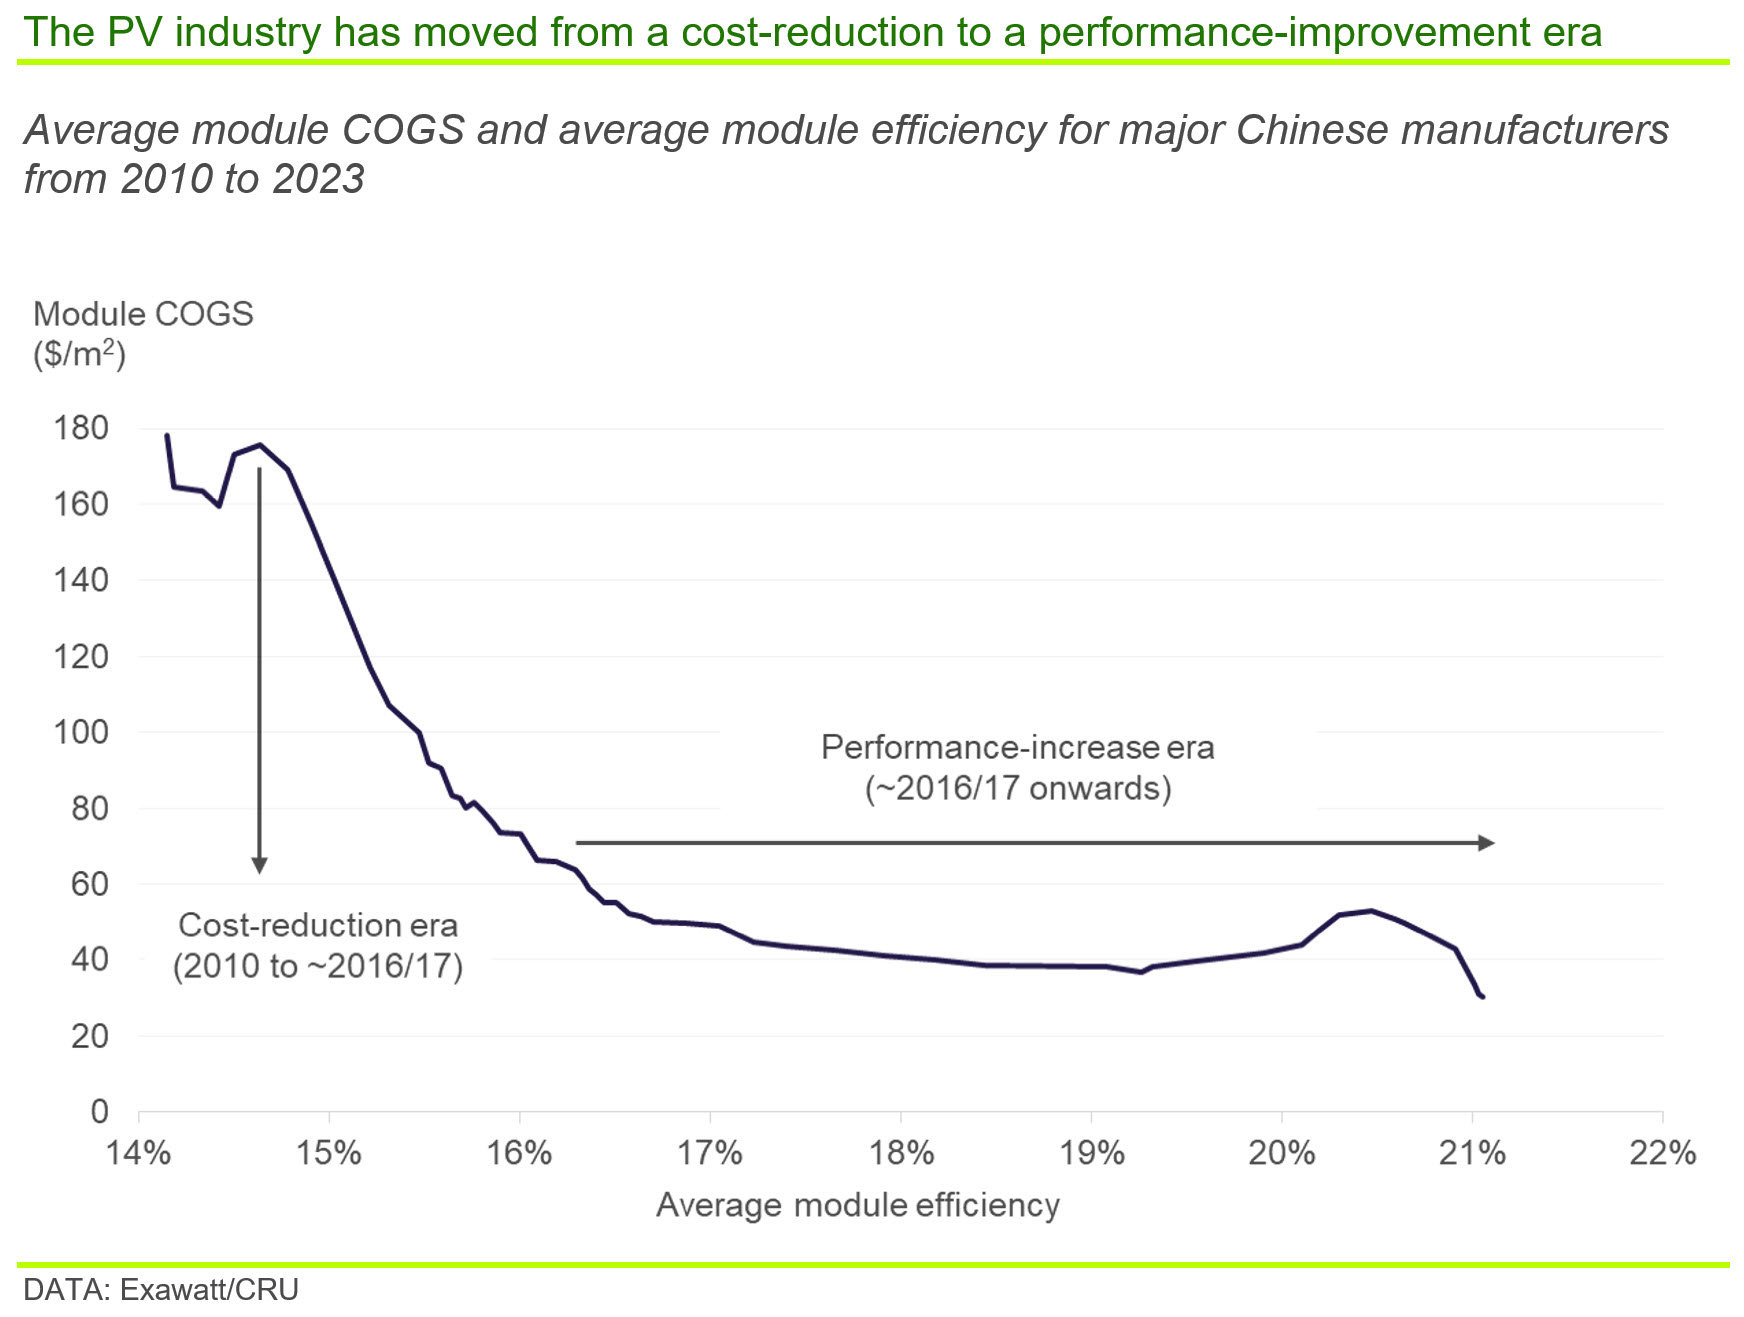 Graph showing that the PV industry has moved from a cost-reduction to a performance-improvement era